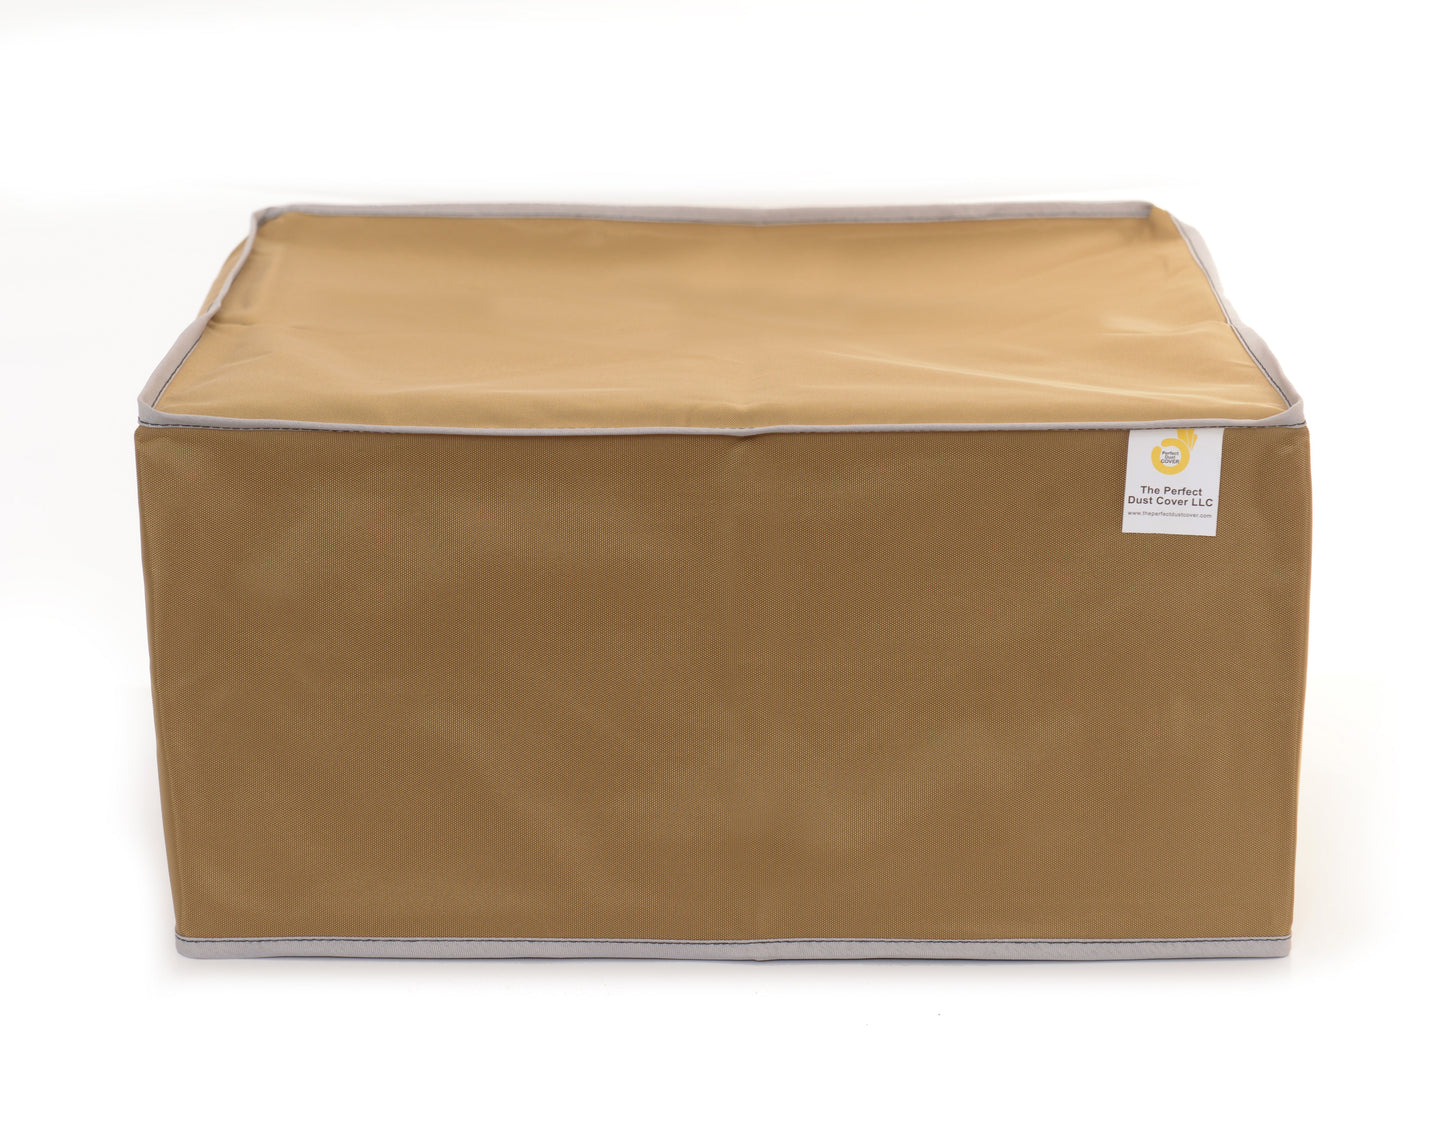 The Perfect Dust Cover, Tan Nylon Cover Compatible with Brother HL-L8360CDWT Color Laser Printer, Anti-Static and Waterproof Dust Cover by The Perfect Dust Cover LLC